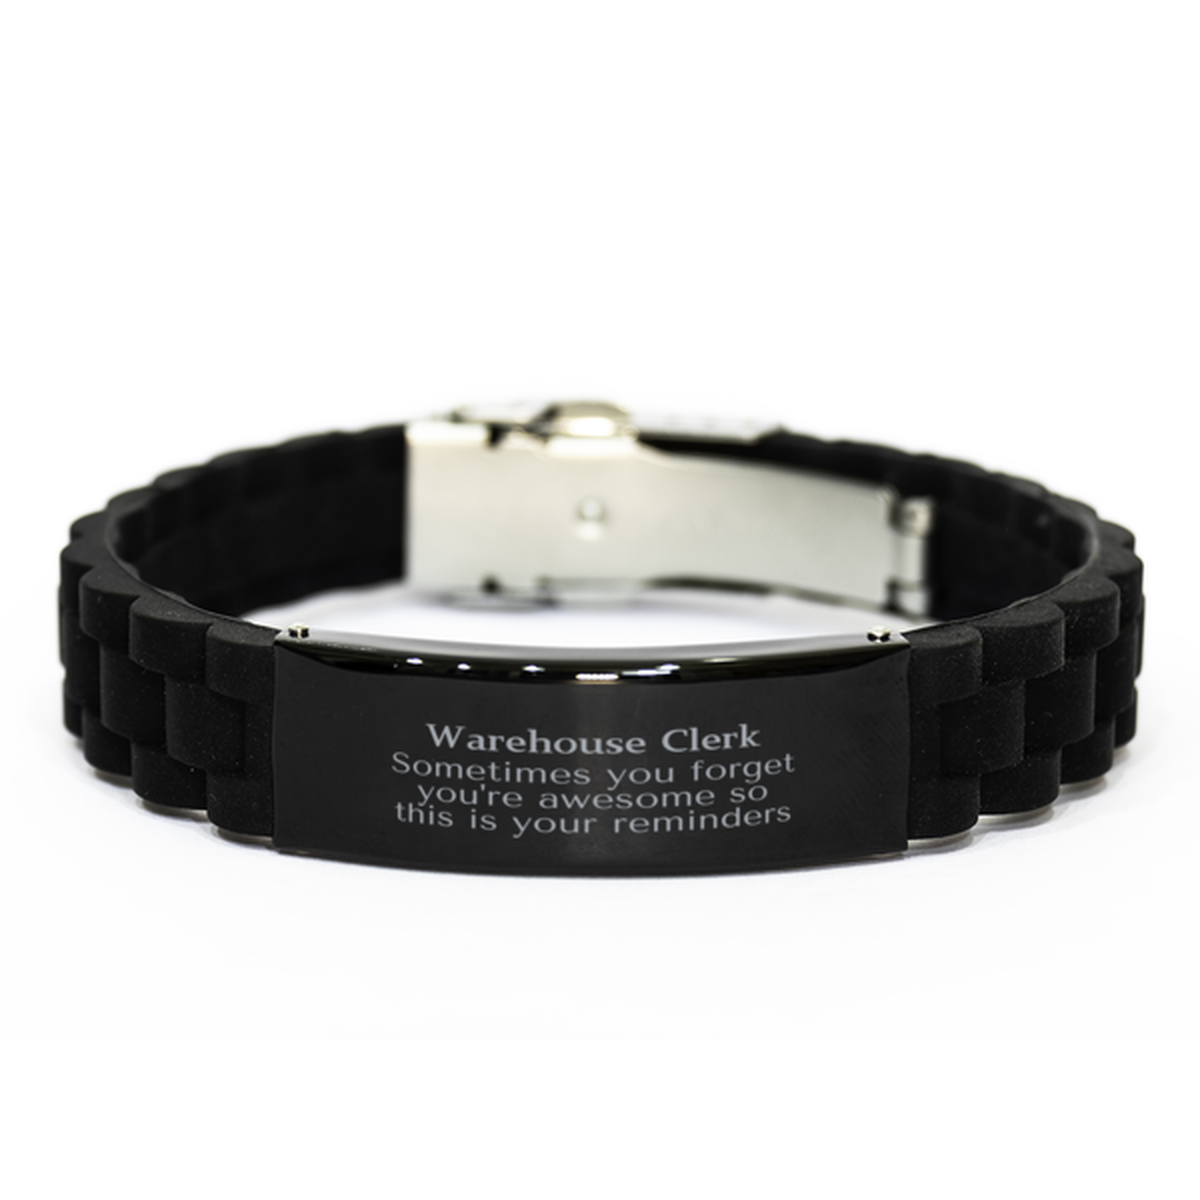 Sentimental Warehouse Clerk Black Glidelock Clasp Bracelet, Warehouse Clerk Sometimes you forget you're awesome so this is your reminders, Graduation Christmas Birthday Gifts for Warehouse Clerk, Men, Women, Coworkers